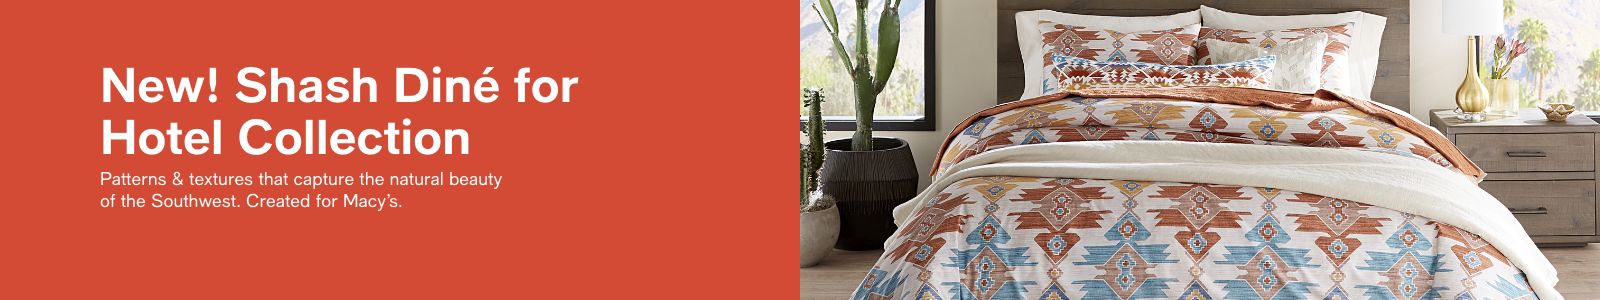 New! Shash Diné for Hotel Collection. Patterns & textures that capture the natural beauty of the Southwest. Created for Macy's.